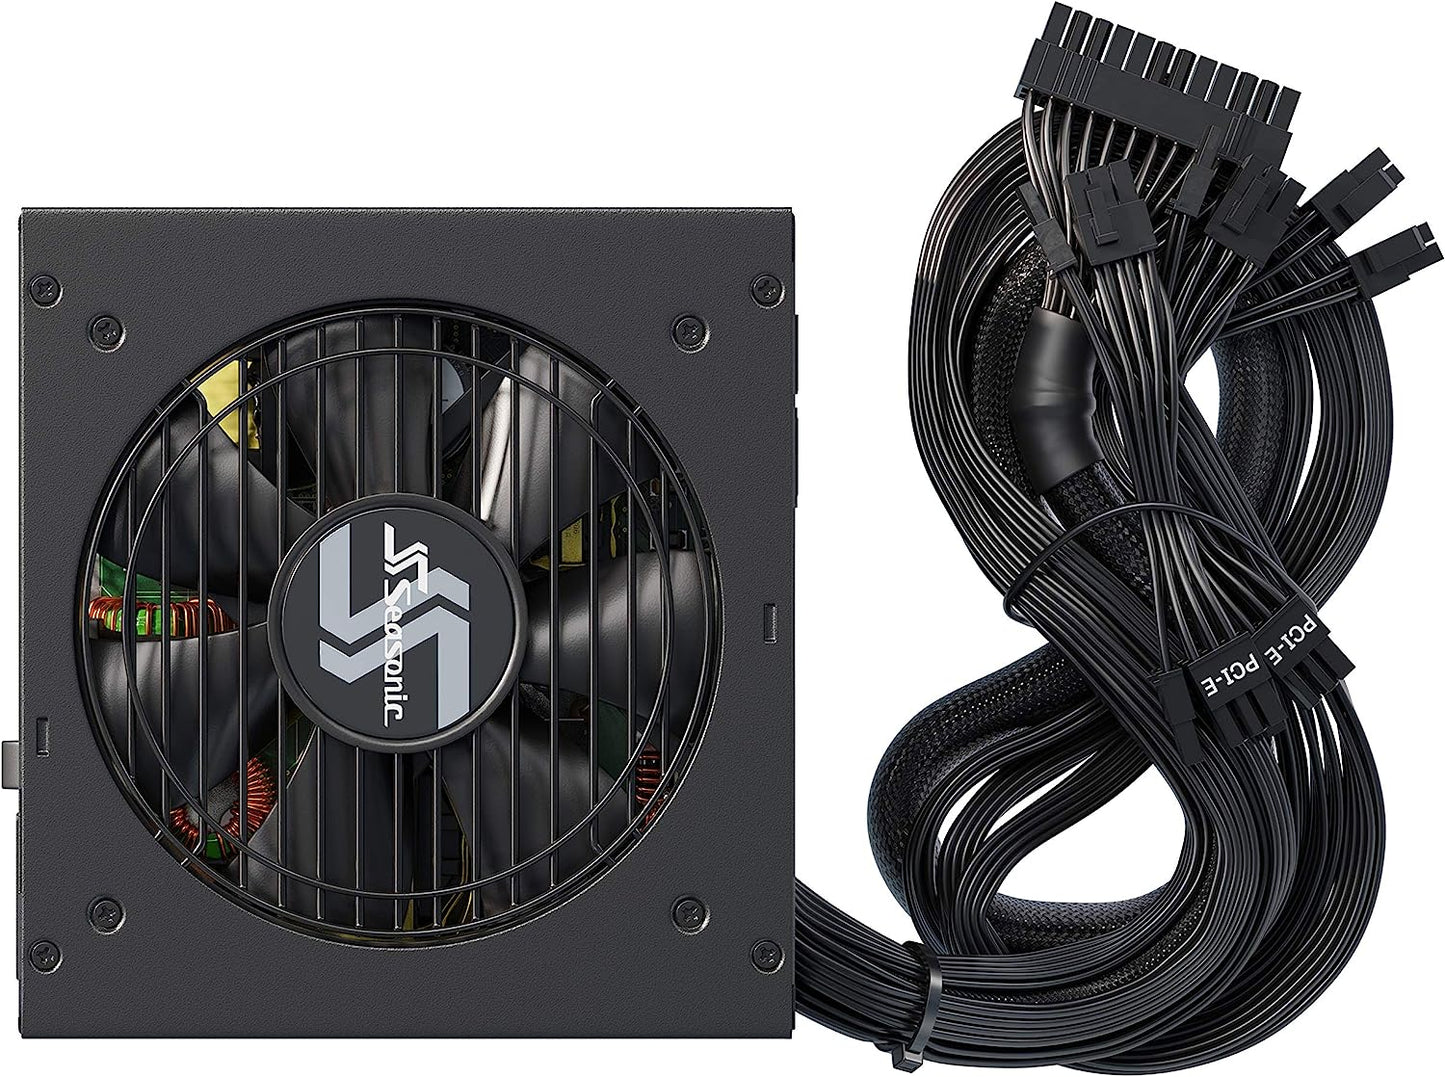 Seasonic Focus GM-850, 850W 80+ Gold, Semi-Modular, Fits All ATX Systems, Fan Control in Silent and Cooling Mode, 7 Year Warranty, Perfect Power Supply for Gaming and Various Application (SSR-850FM)